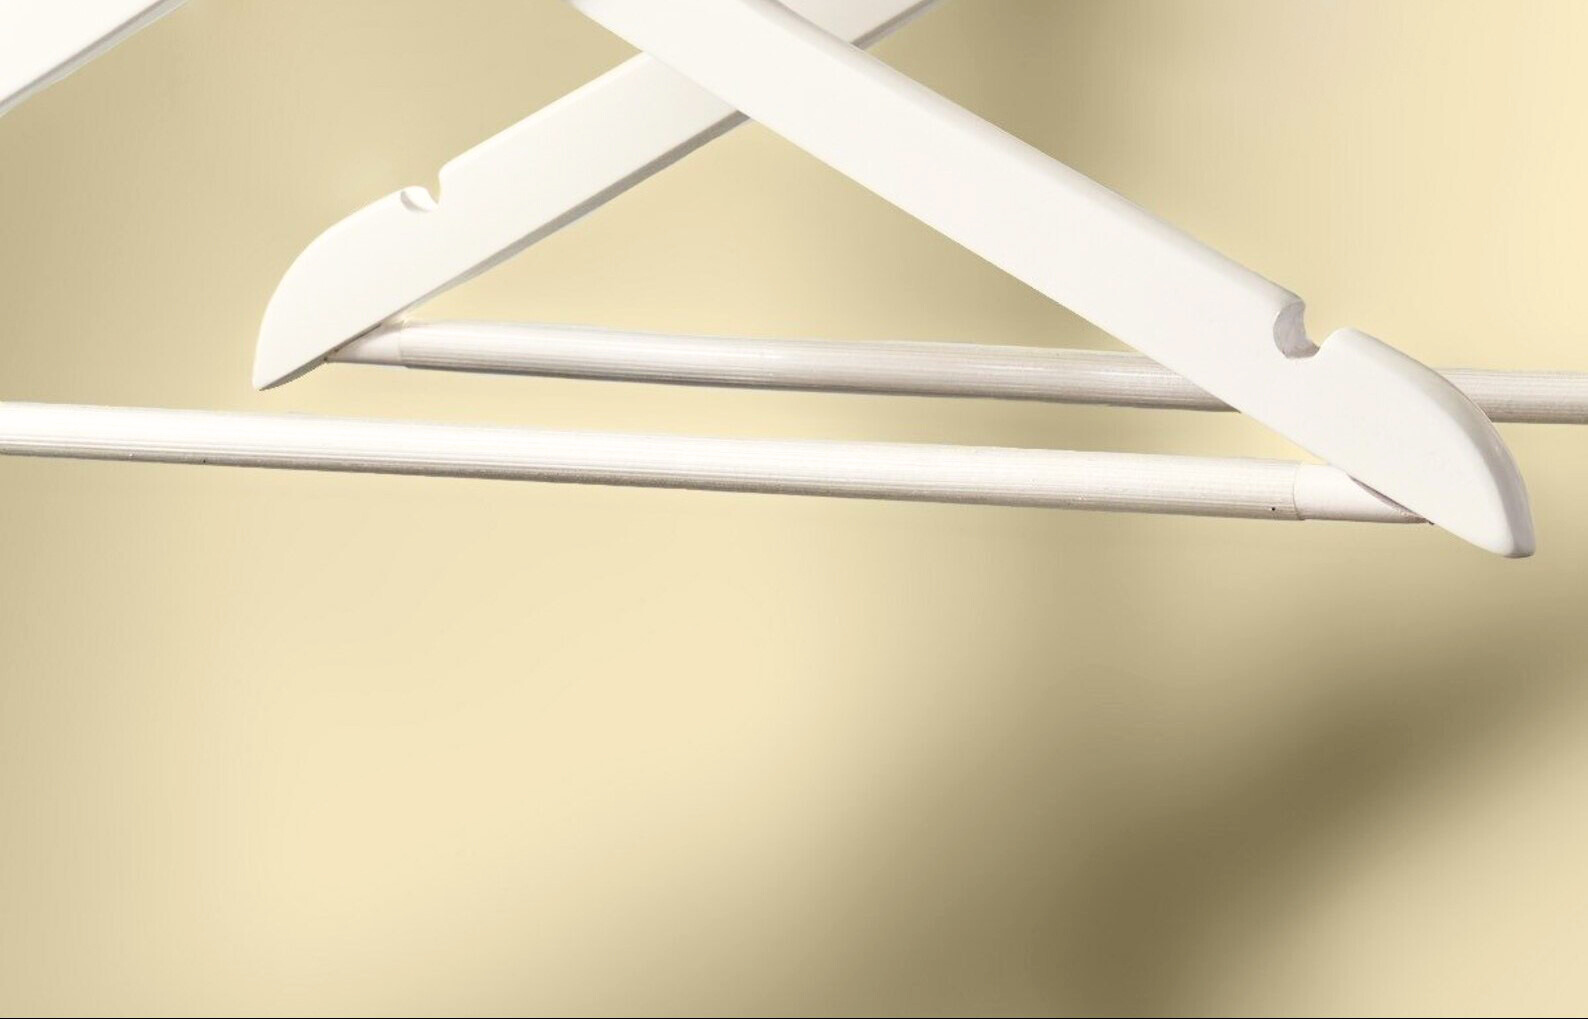 Ivory Wooden Flat Suit Hangers’ non-slip wood pant bars with plastic grooved sleeves designed to hold clothes in place